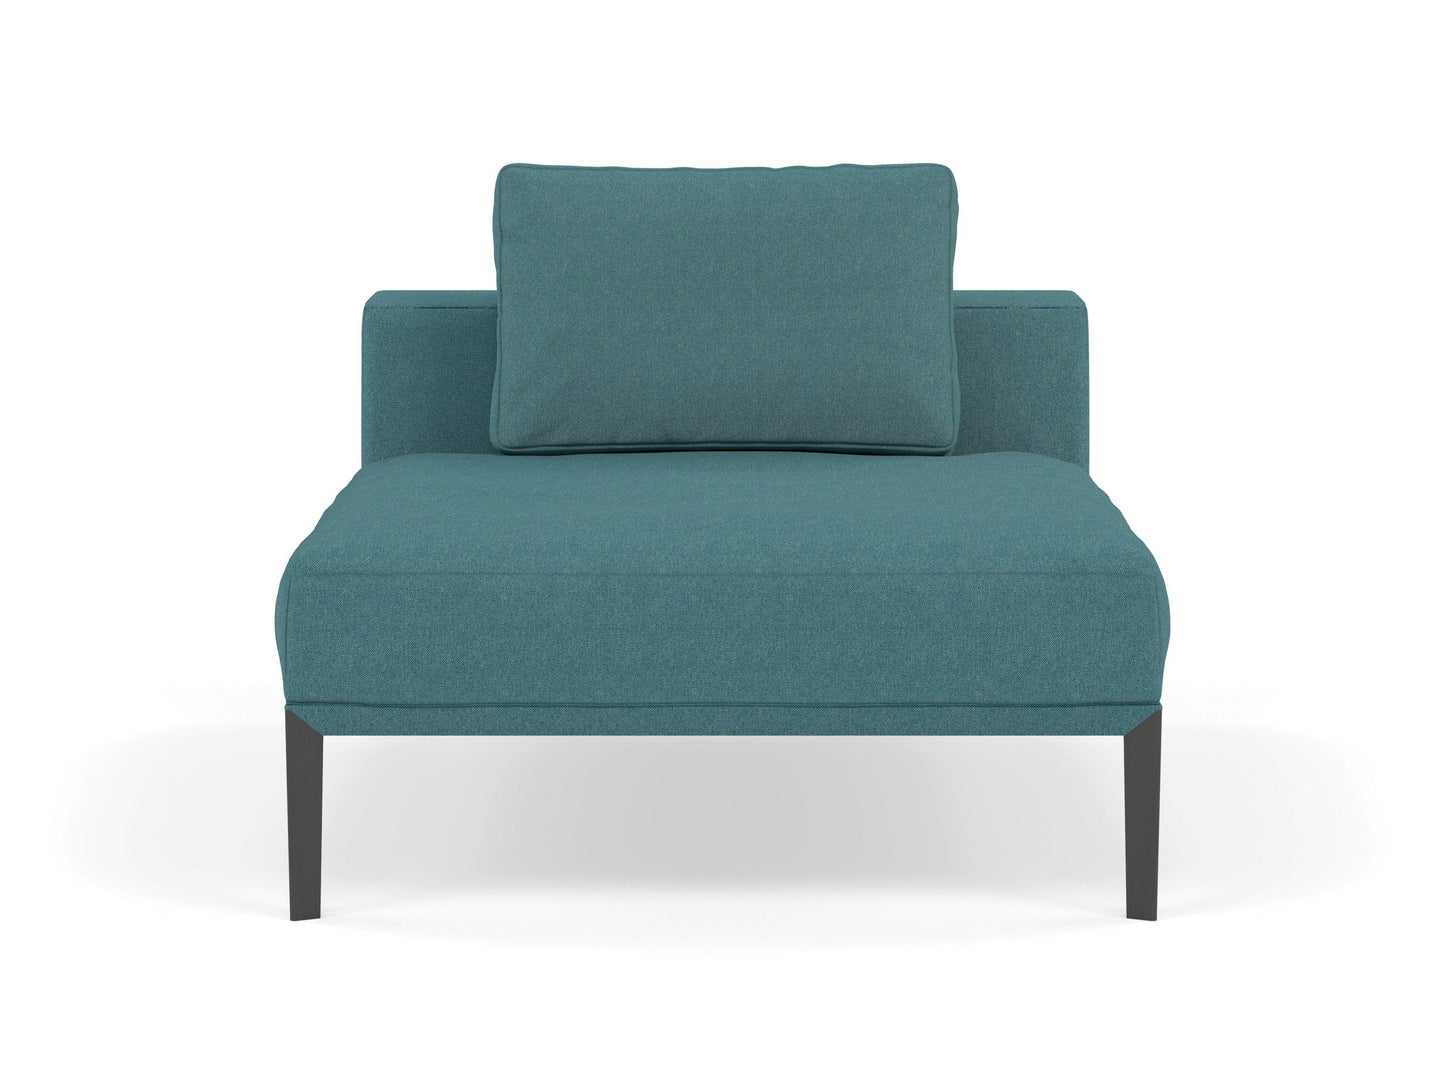 Modern Armchair 1 Seater Sofa without armrests in Teal Blue Fabric-Wenge Oak-Distinct Designs (London) Ltd